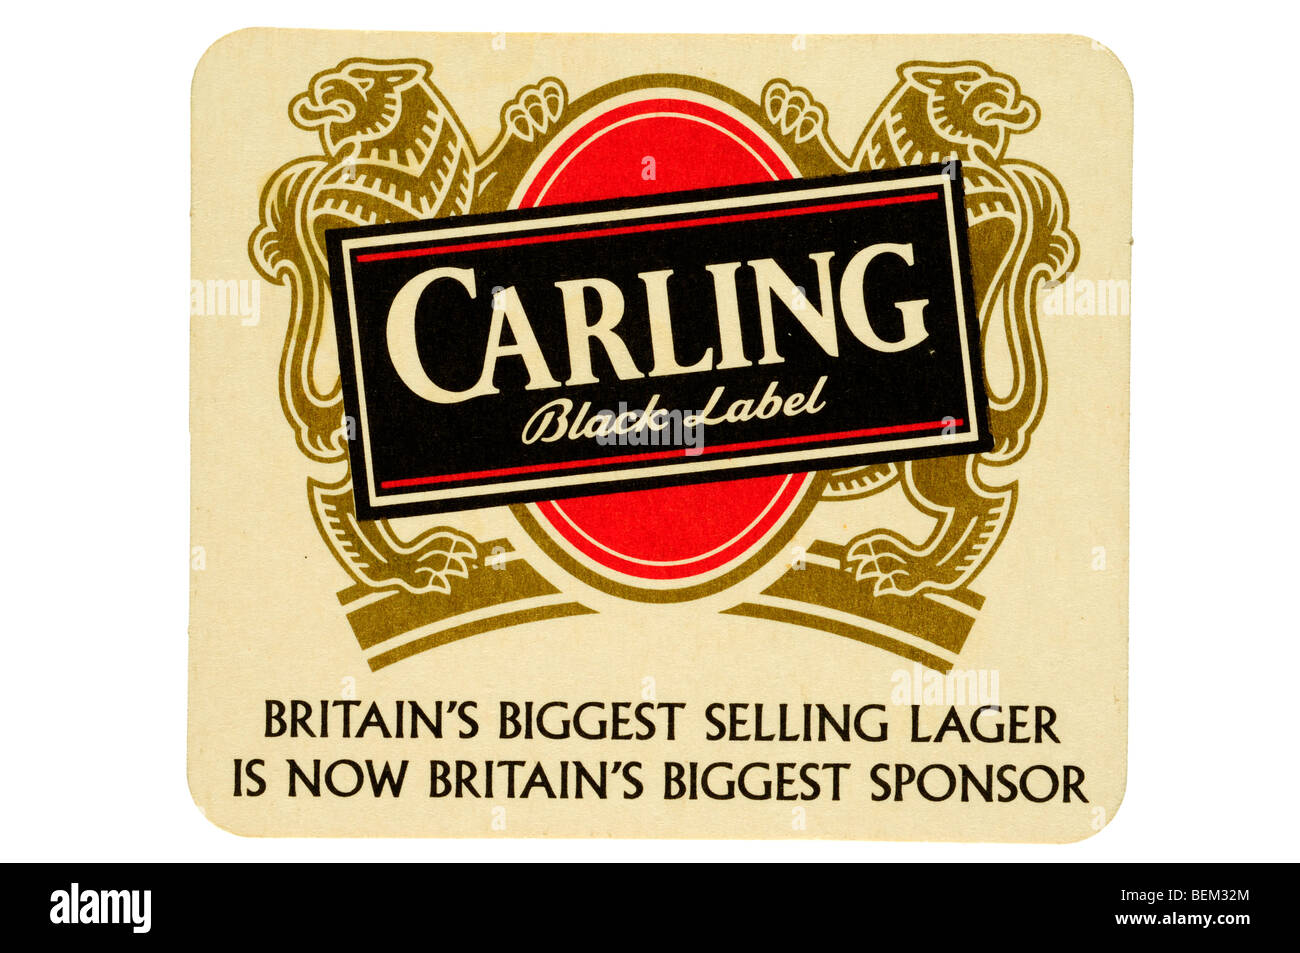 carling black label britains biggest selling lager is now britains biggest sponsor Stock Photo